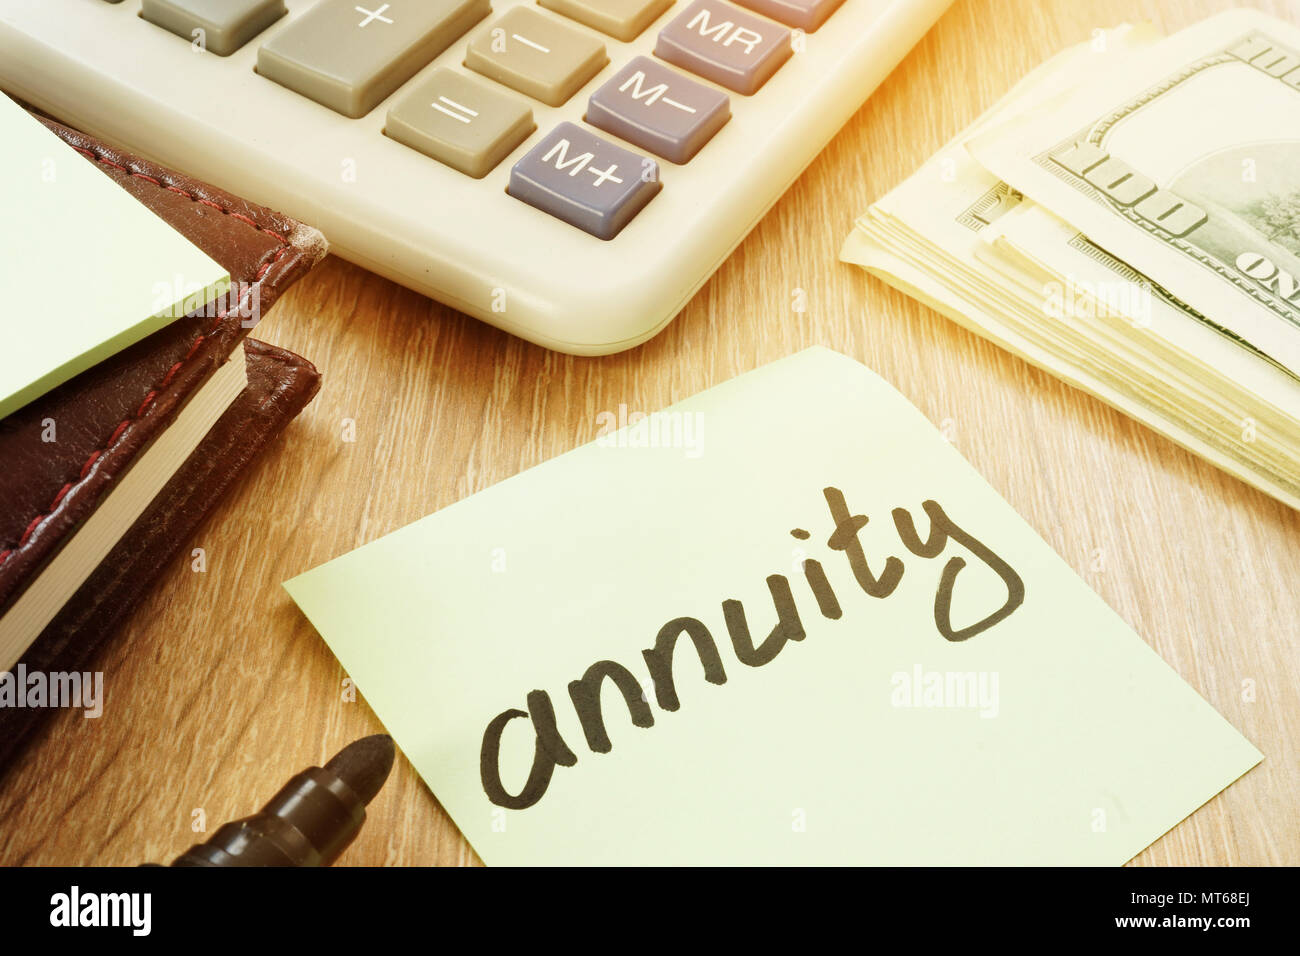 Annuity sign and calculator. Money for savings. Stock Photo